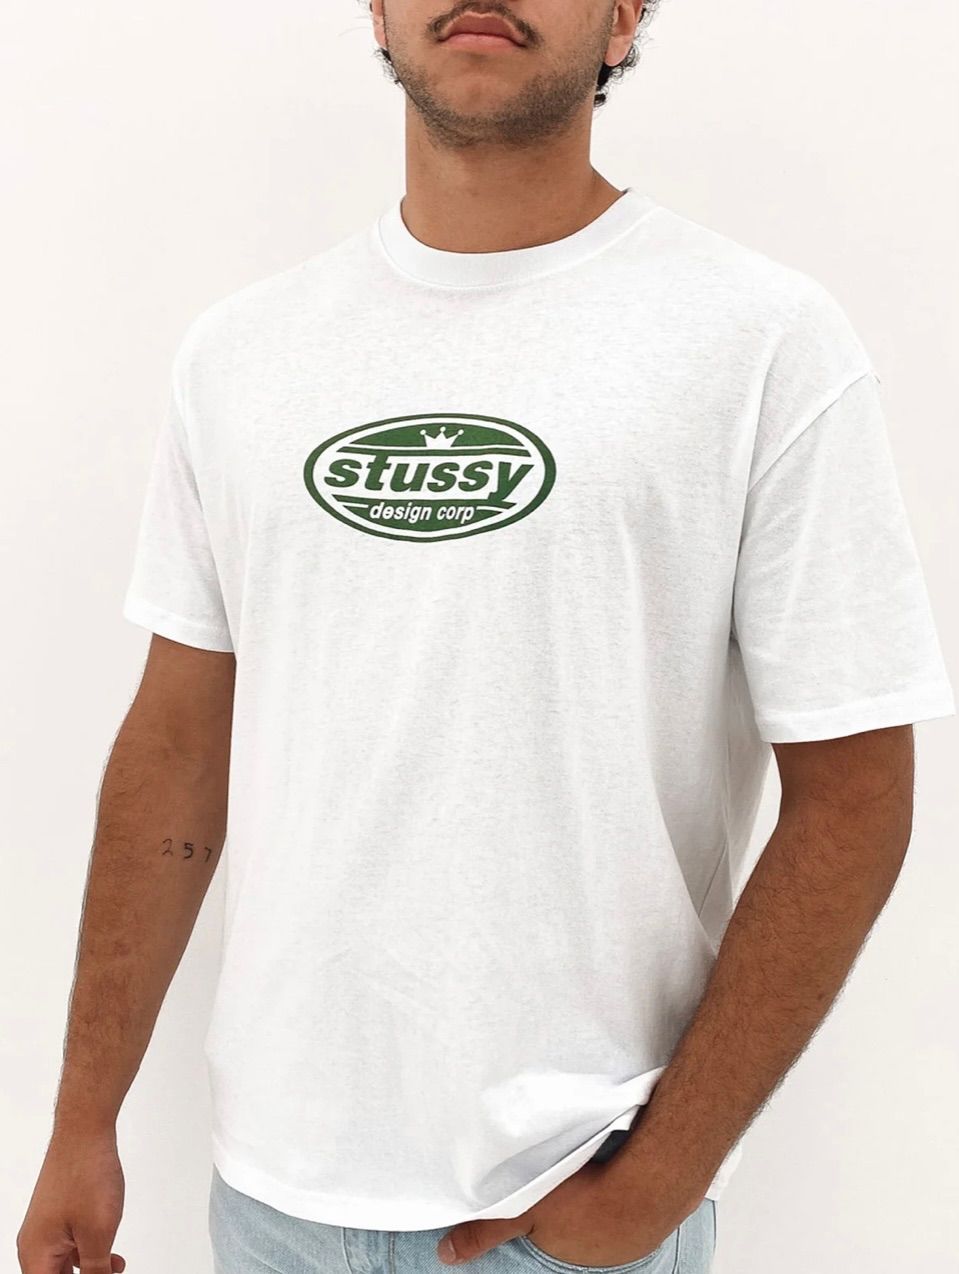 Stussy Oval Corp. SS Tee ステューシー Tシャツ L cambioygerencia.com.pe